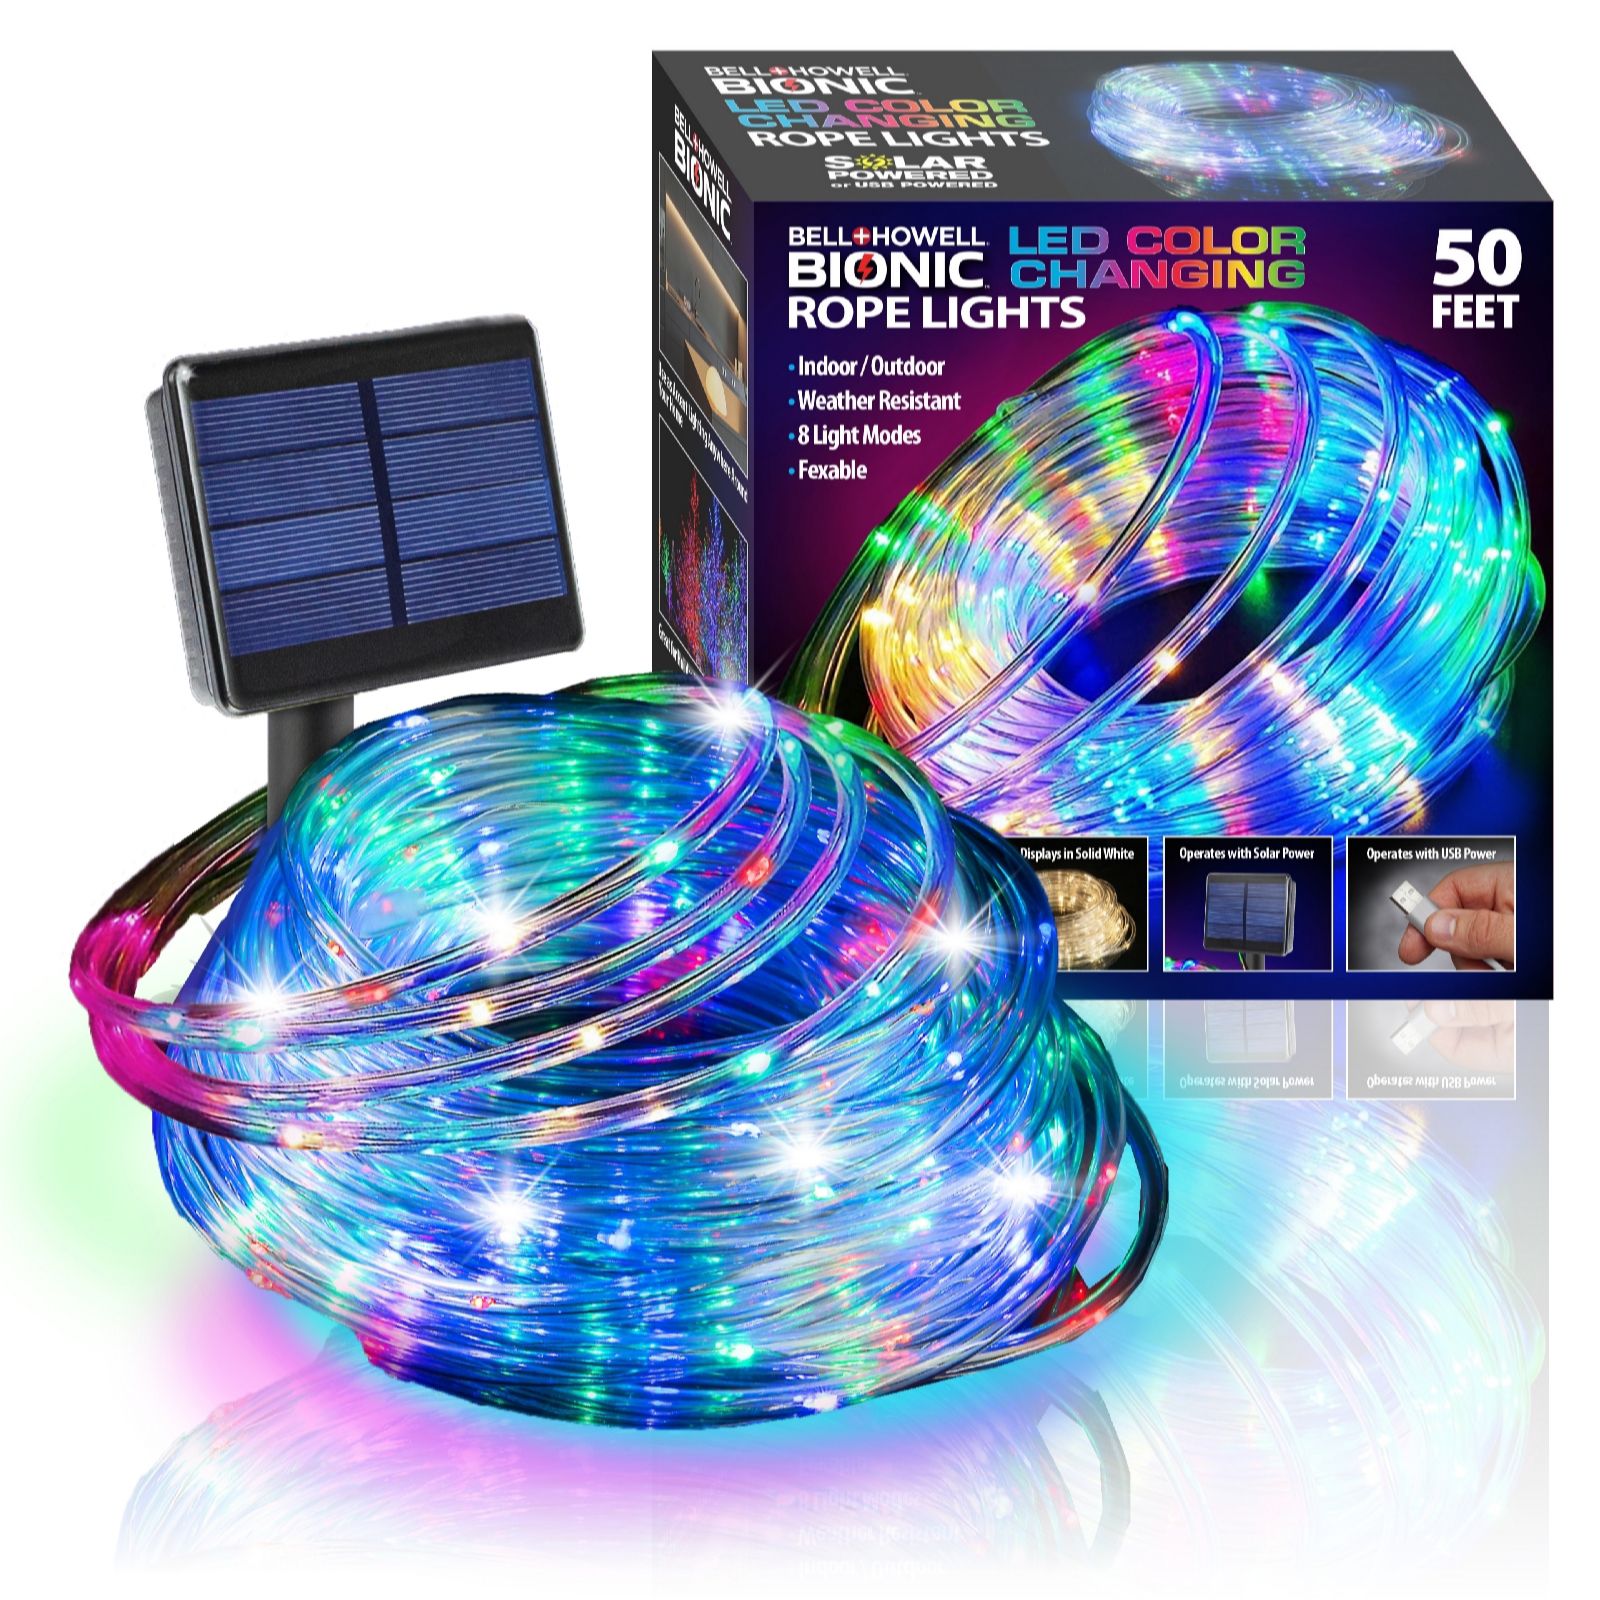 Bell & Howell Dual Powered 50ft Bionic Rope Light with Remote - QVC UK